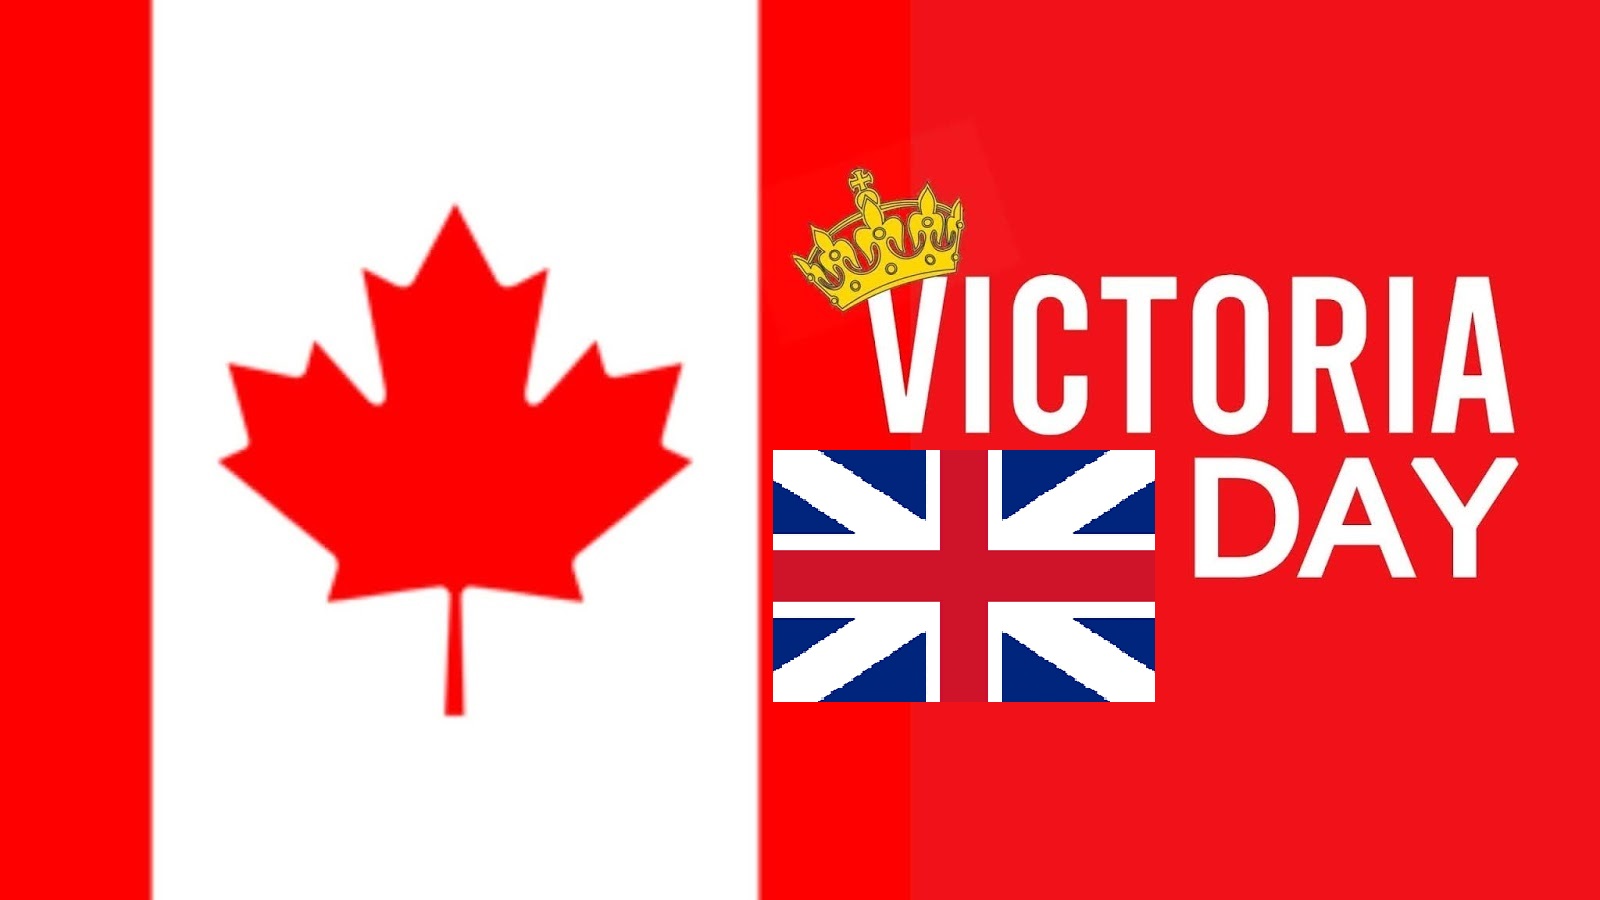 Public Holiday Victoria Day or National Patriotes Day